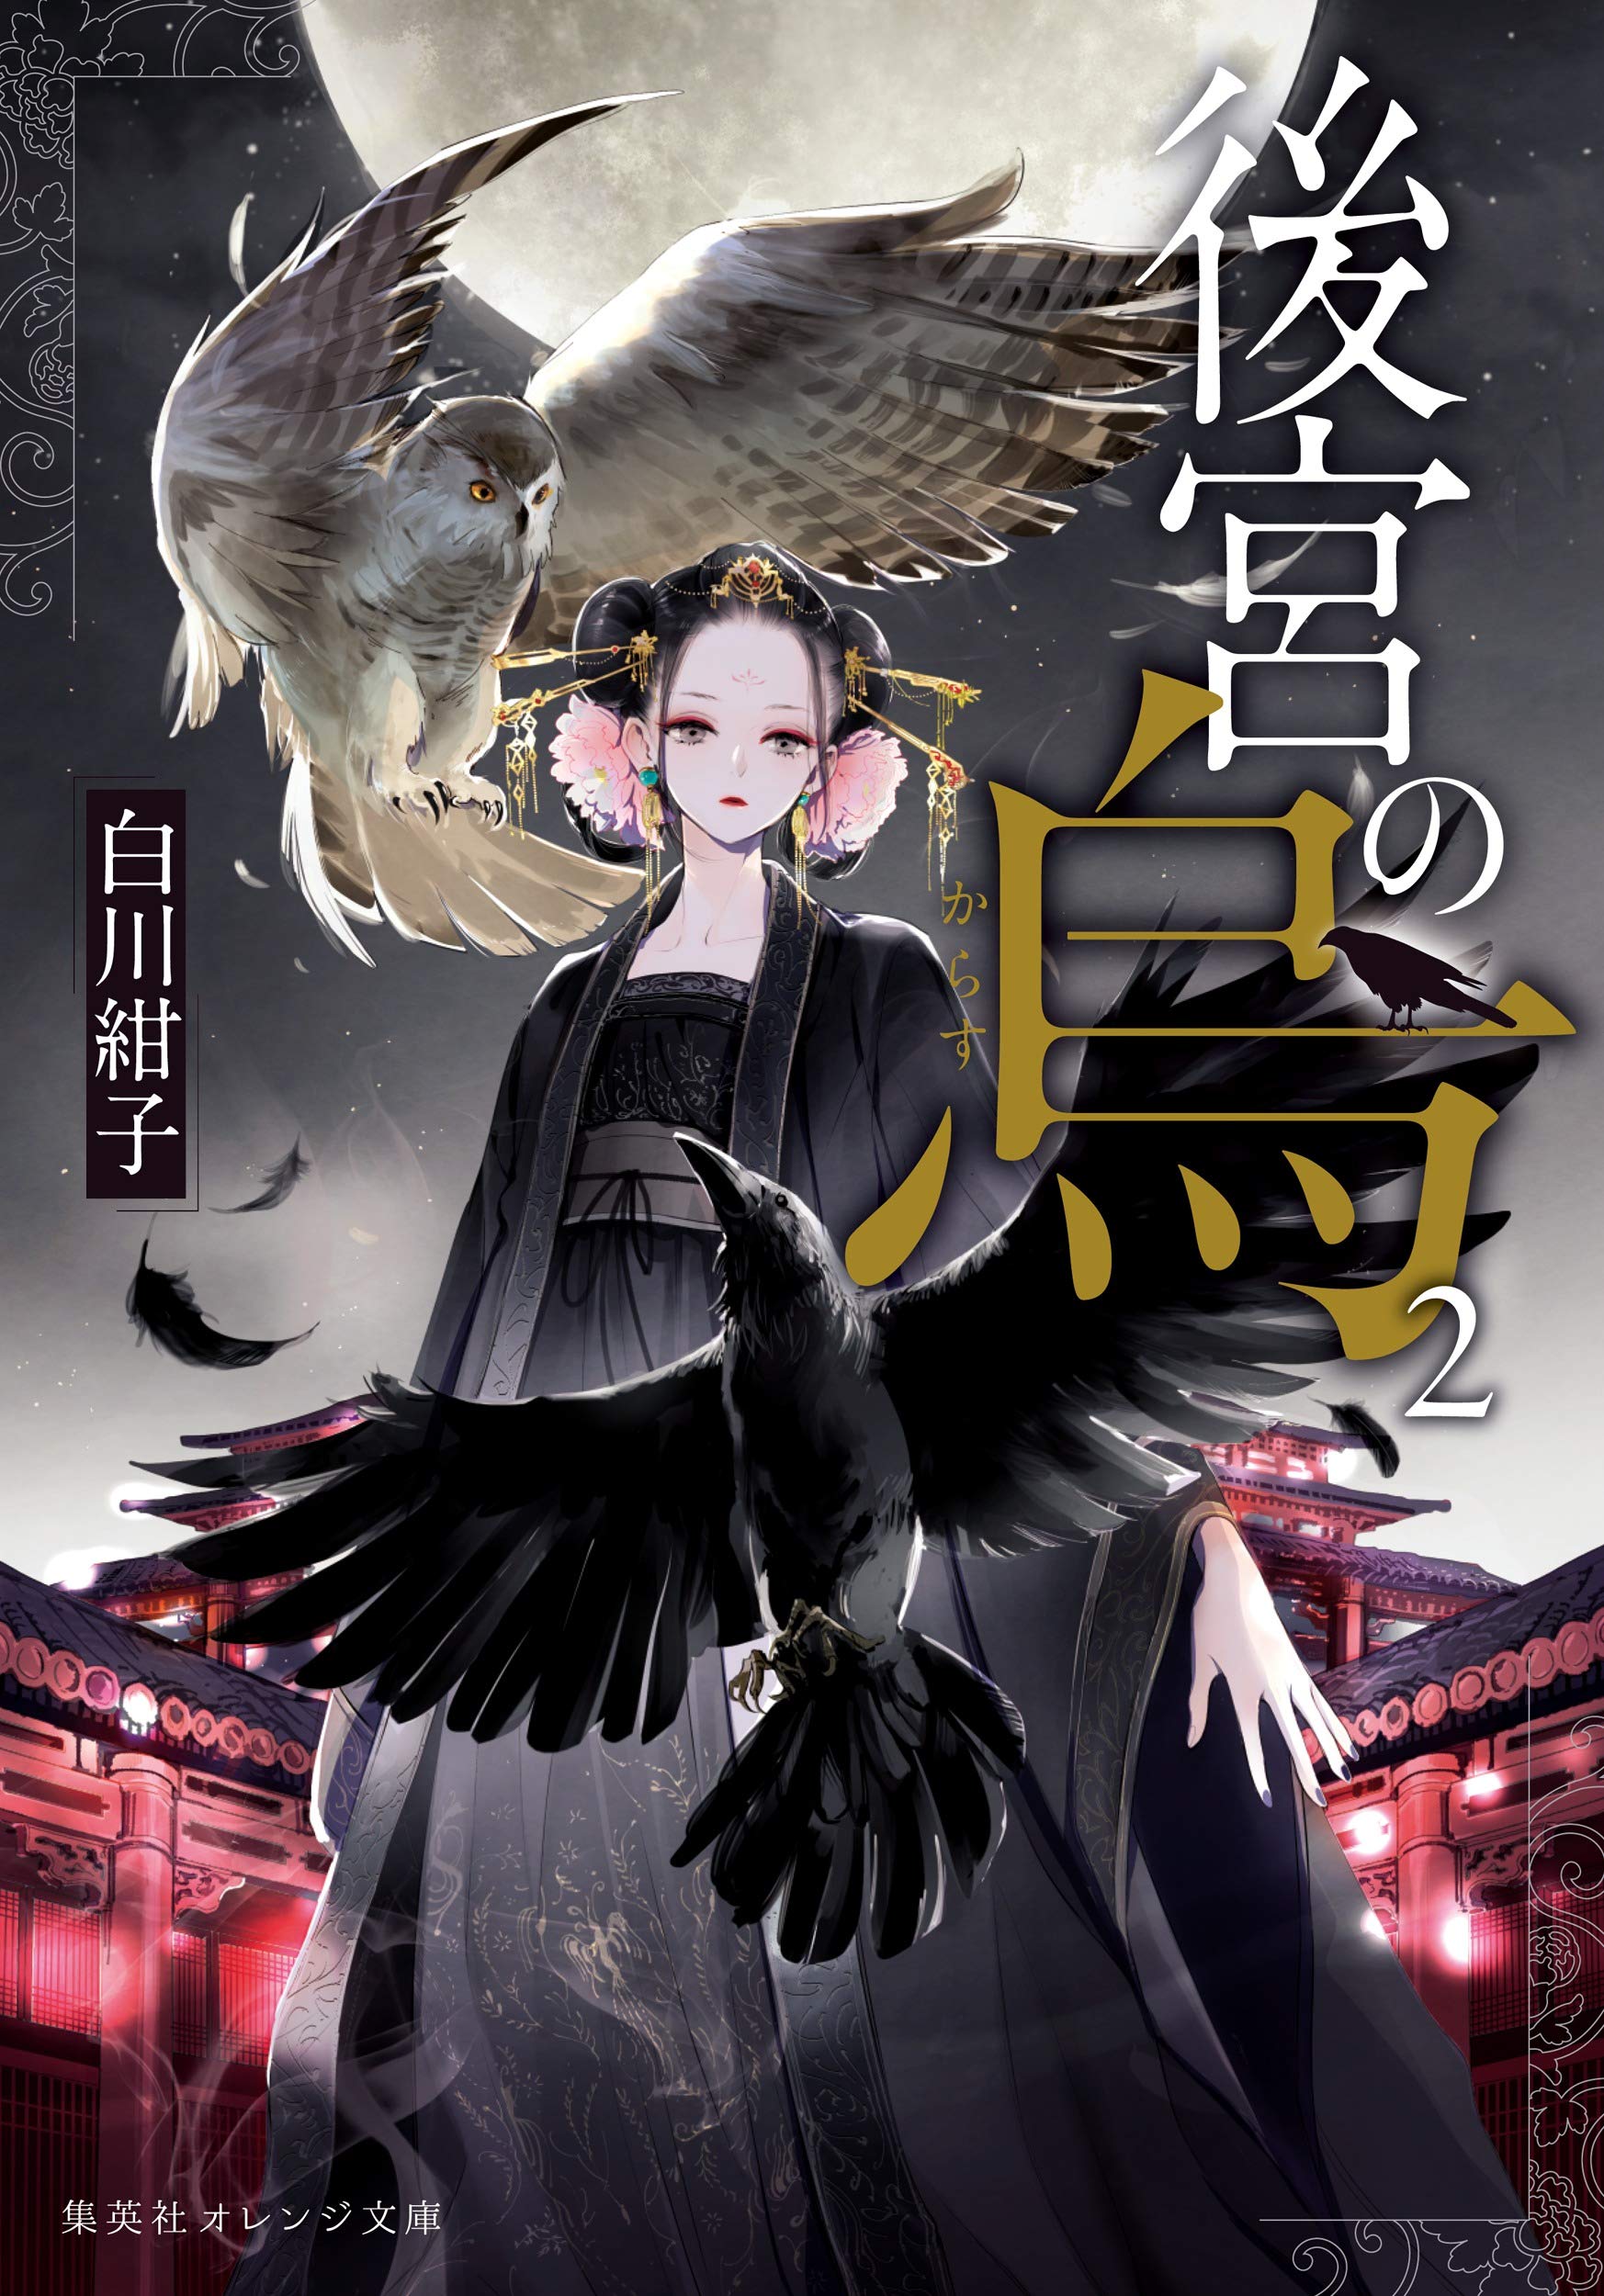 Historical fantasy series Raven of the Inner Palace anime adaption is  premiering on October 1 - Try Hard Guides